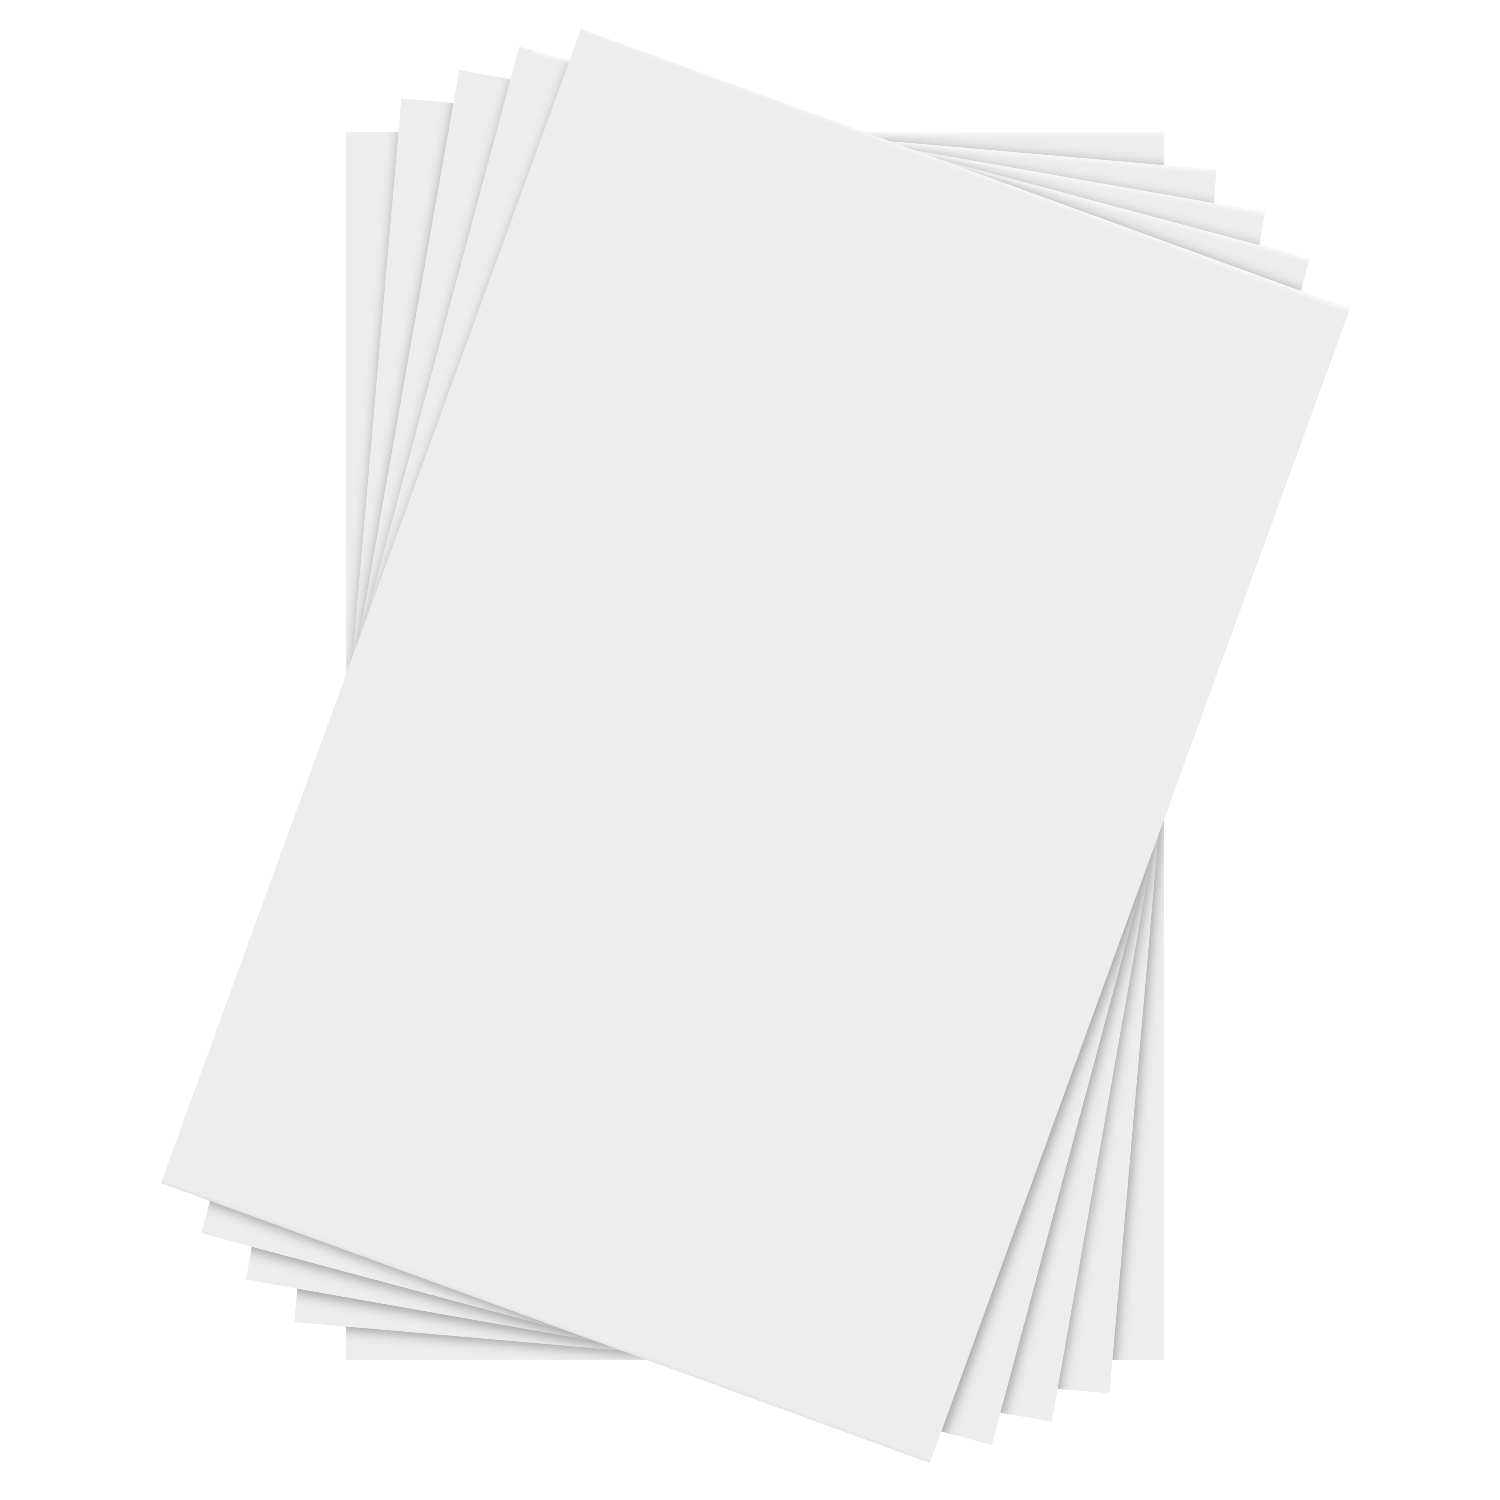 6 x 9" White Chipboard - Cardboard Medium Weight Chipboard Sheets - White on One Side - 25 Per Pack - image 1 of 5